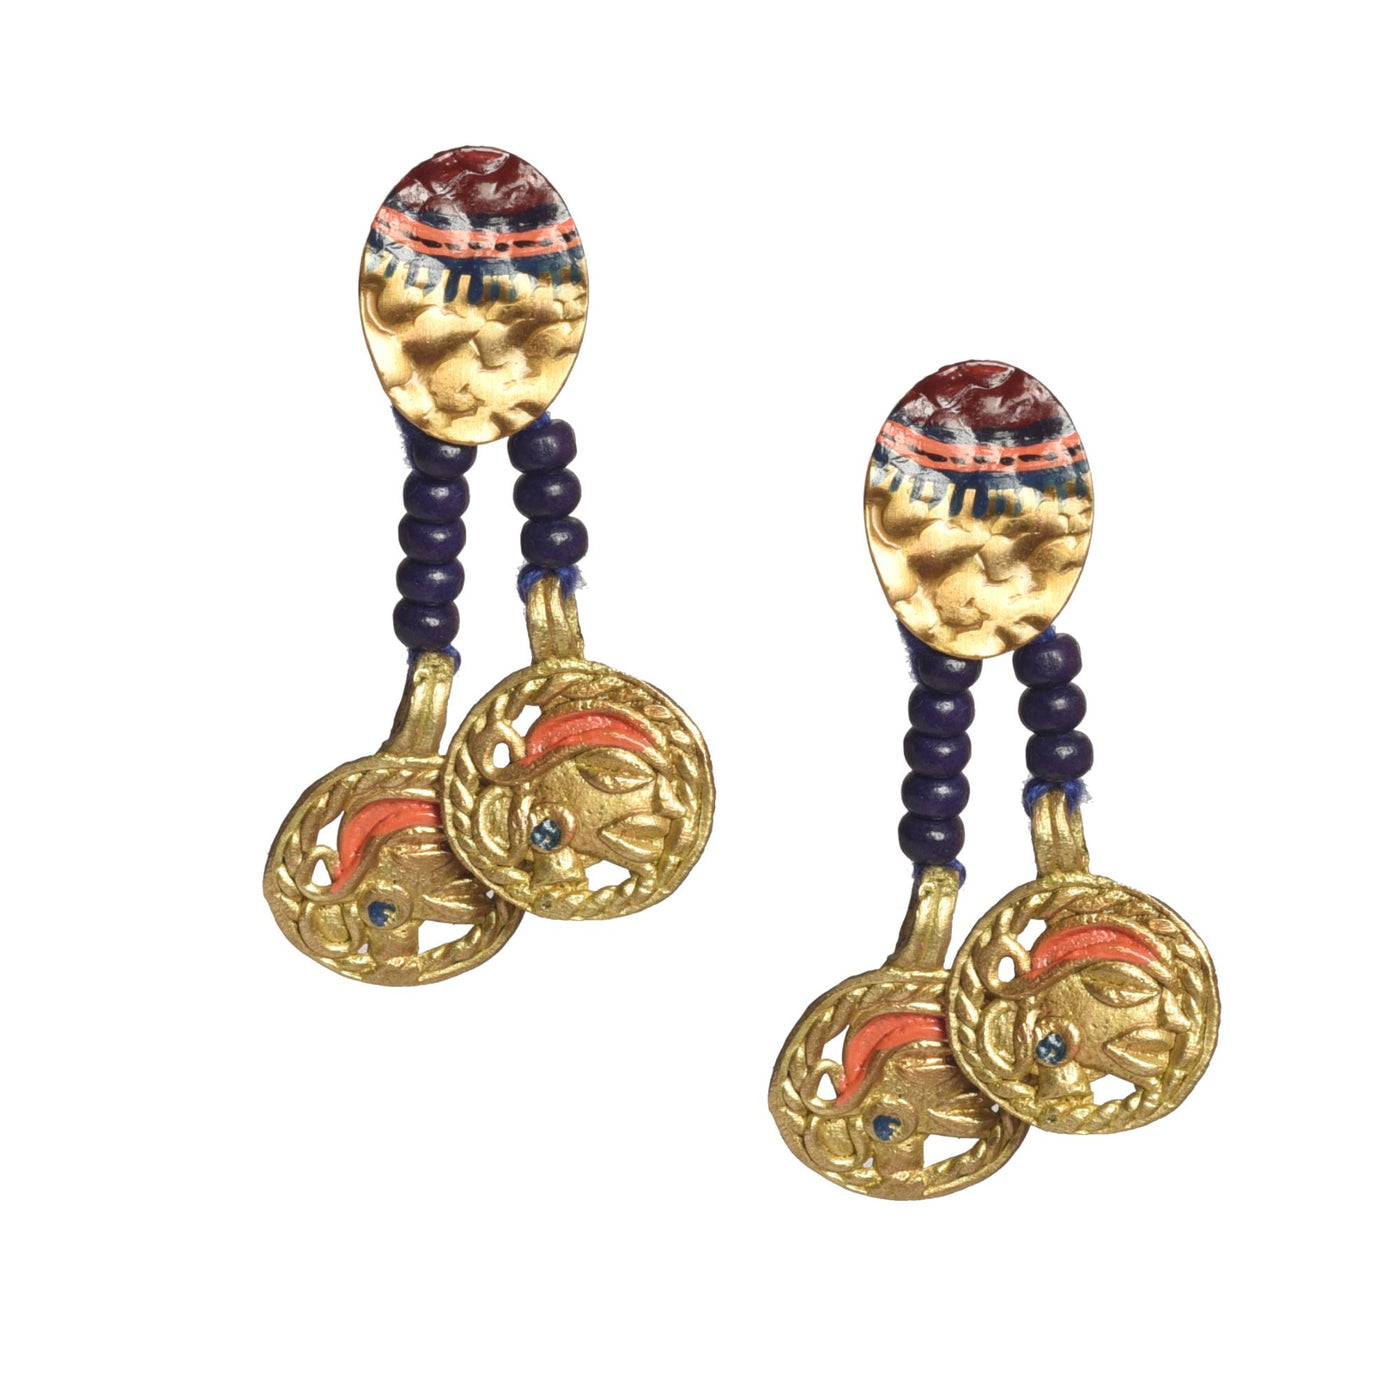 Queens Twins Handcrafted Tribal Earrings - Fashion & Lifestyle - 2